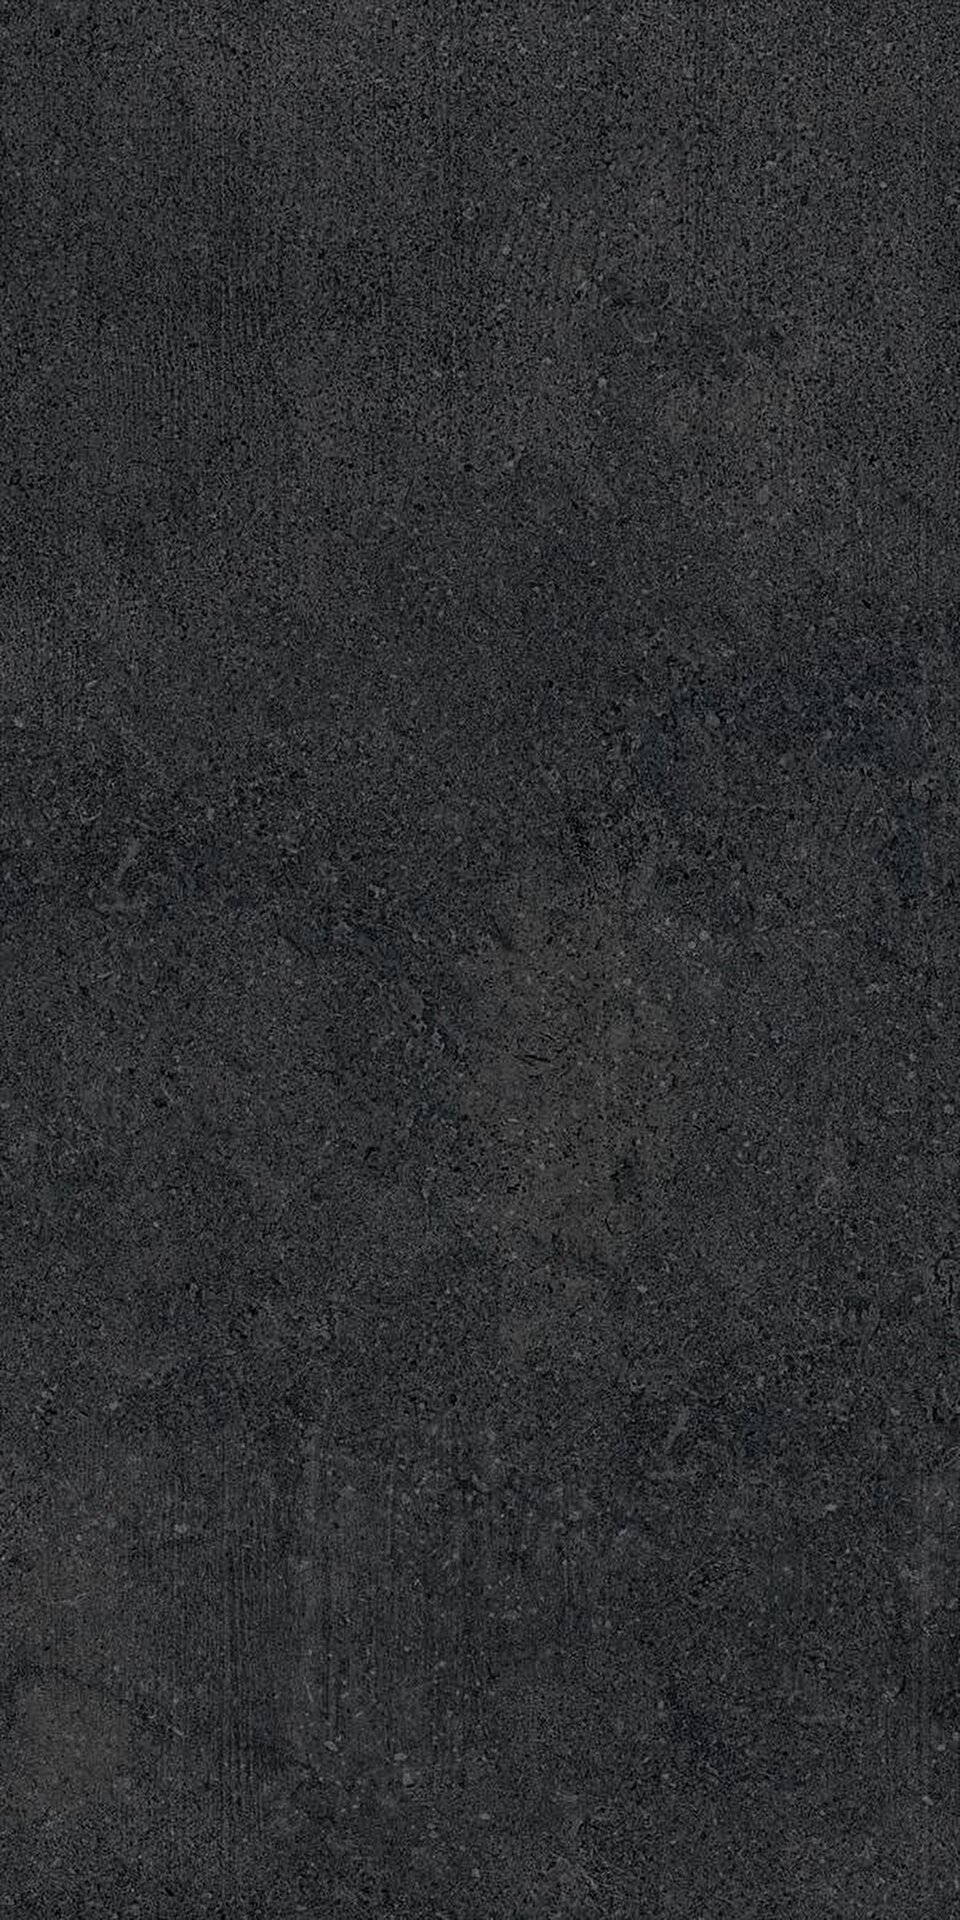 30x60 Newcon Dark Grey Tile R11B Features - VitrA Global